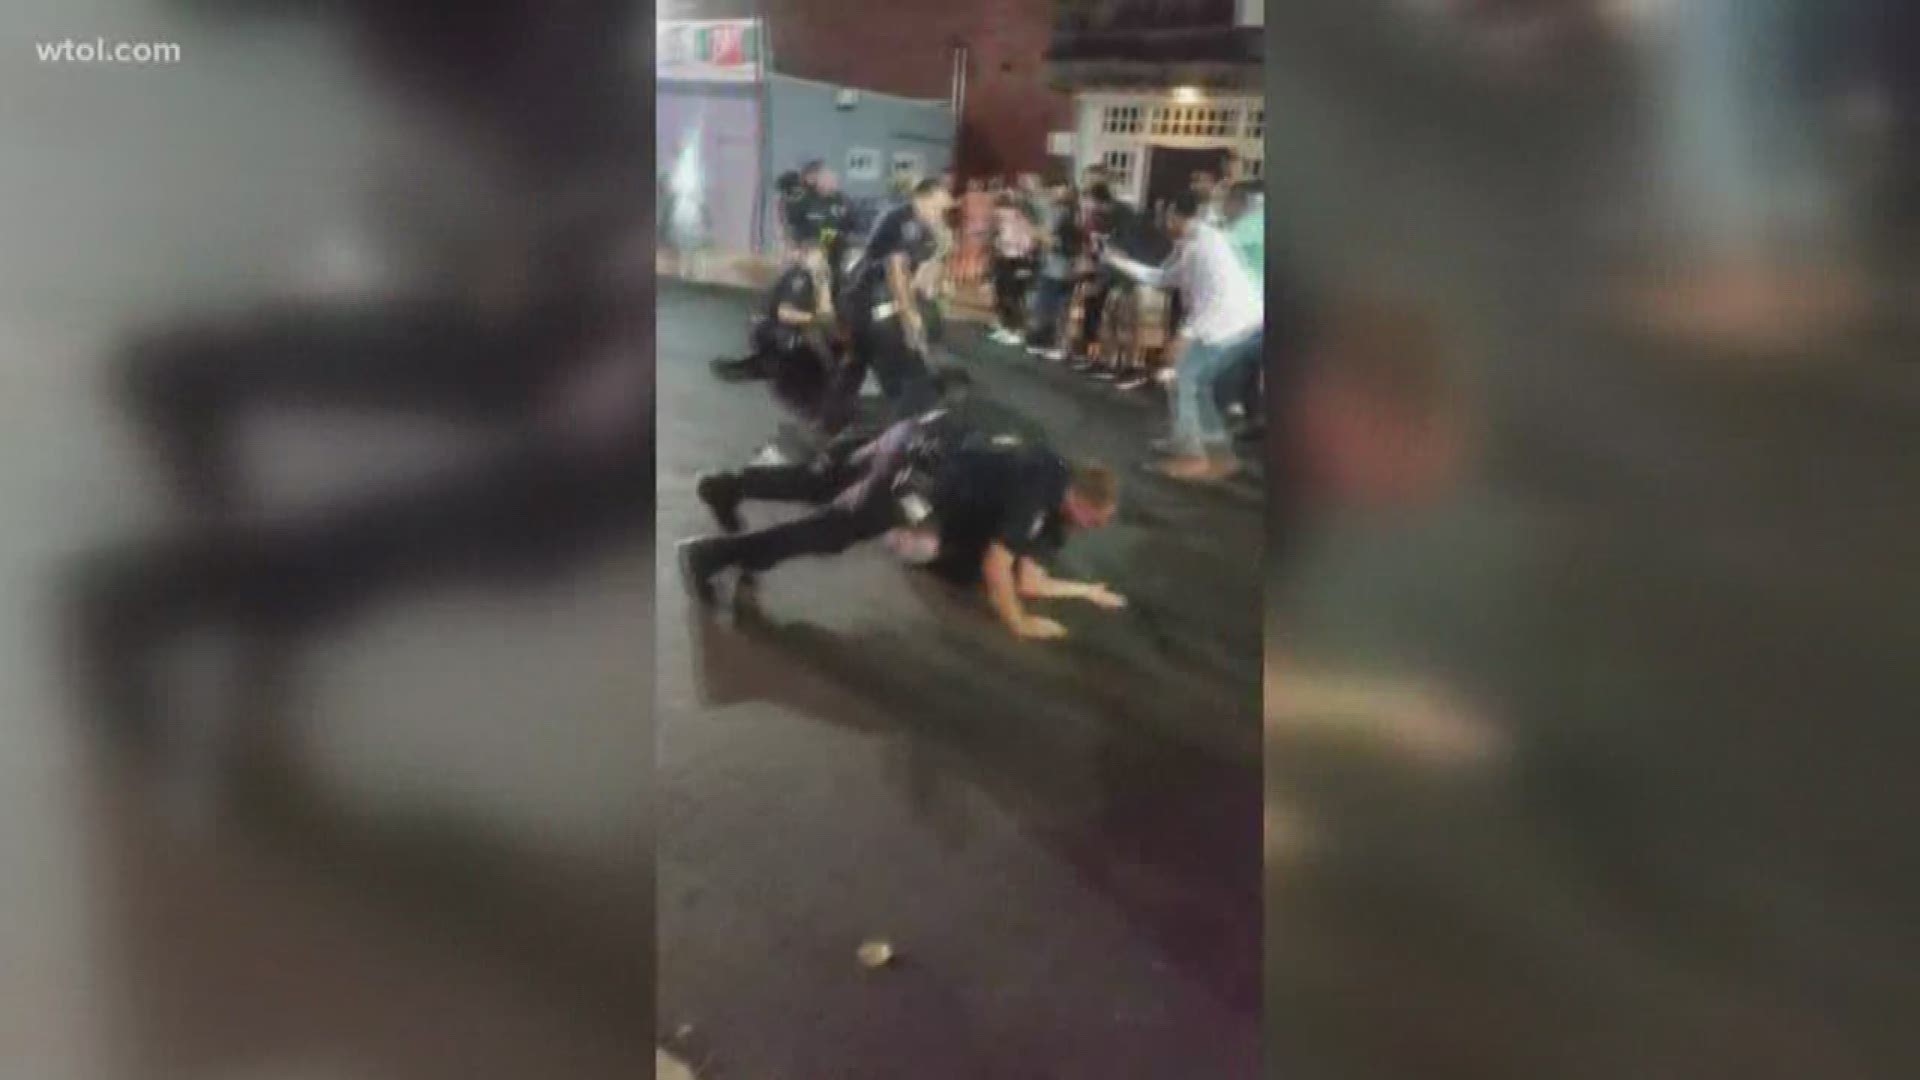 The fight broke out at 2:18 a.m. Saturday on the 100 block of East Court Street.